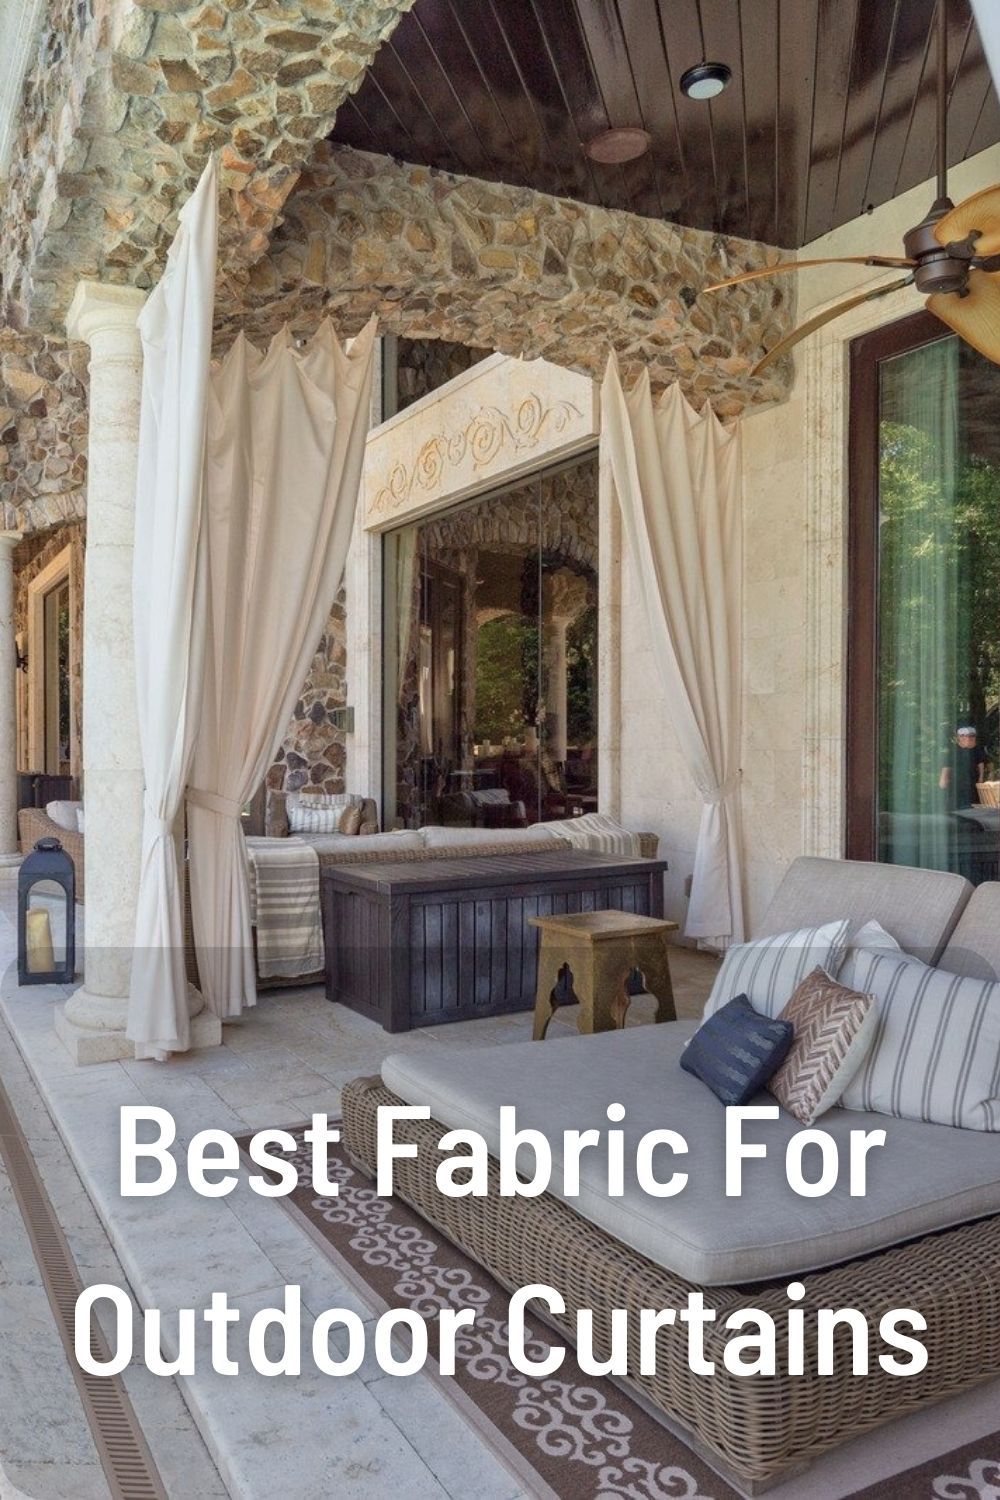 Best Fabric For Outdoor Curtains